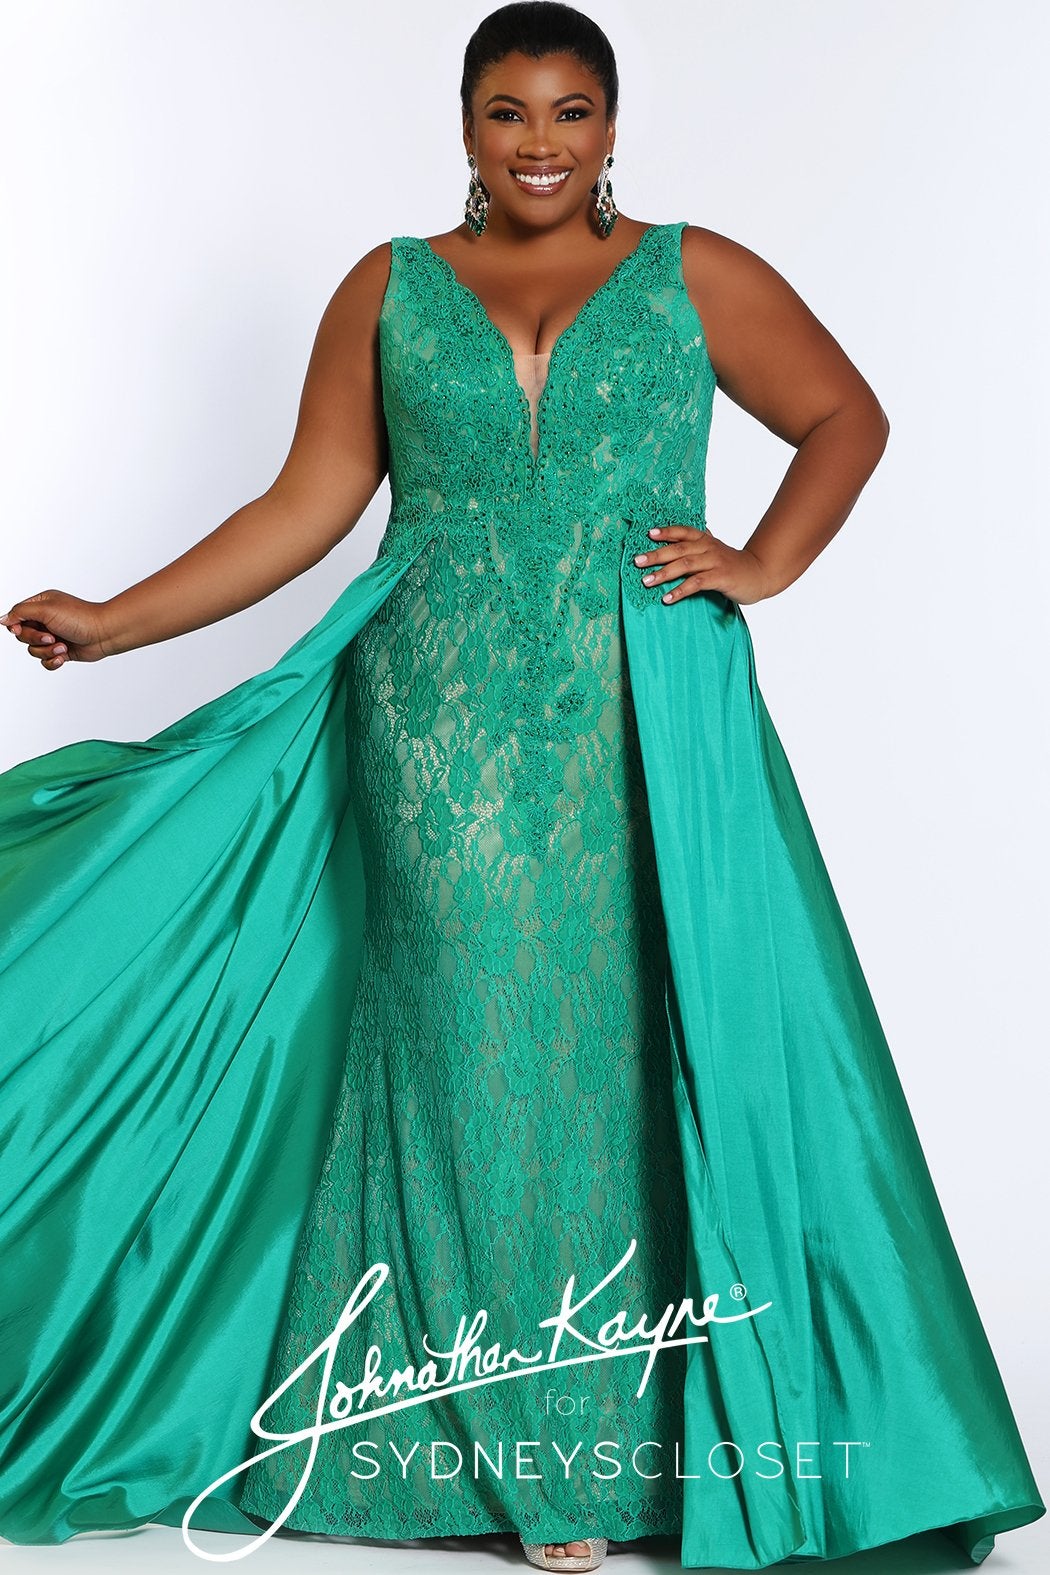 Johnathan Kayne for Sydneys Closet JK2016 Stingray halter neckline fitted lace plus size prom dress with flowy taffeta over skirt JK 2016 Evening gown pageant gown, wedding dress  Available colors:  Ruby Red/Nude, Emerald Green/Nude, Onyx/Nude, Fuchsia/Fuchsia, Ivory/Nude  Available sizes:  14-24 